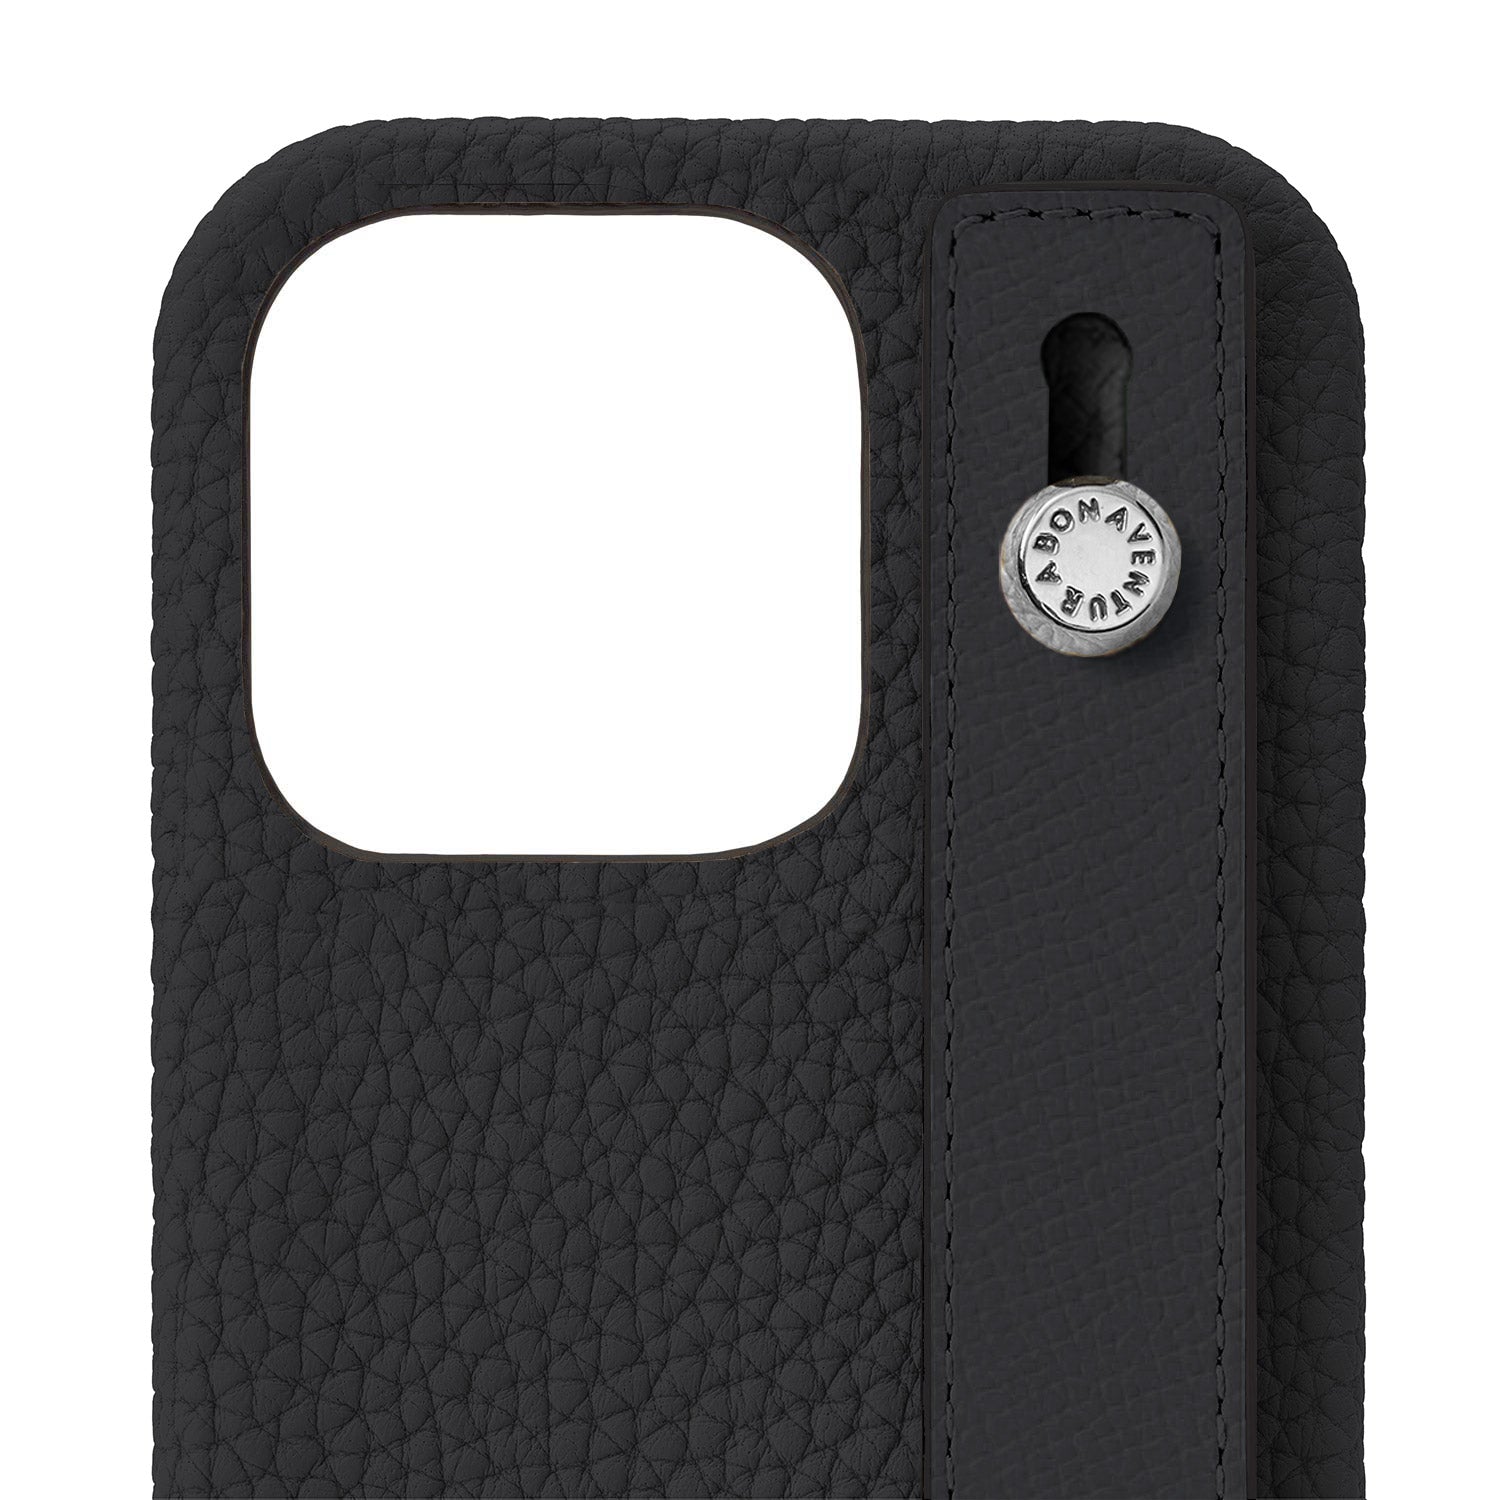 (iPhone 13 Pro Max) Back cover case with handle, shrink leather